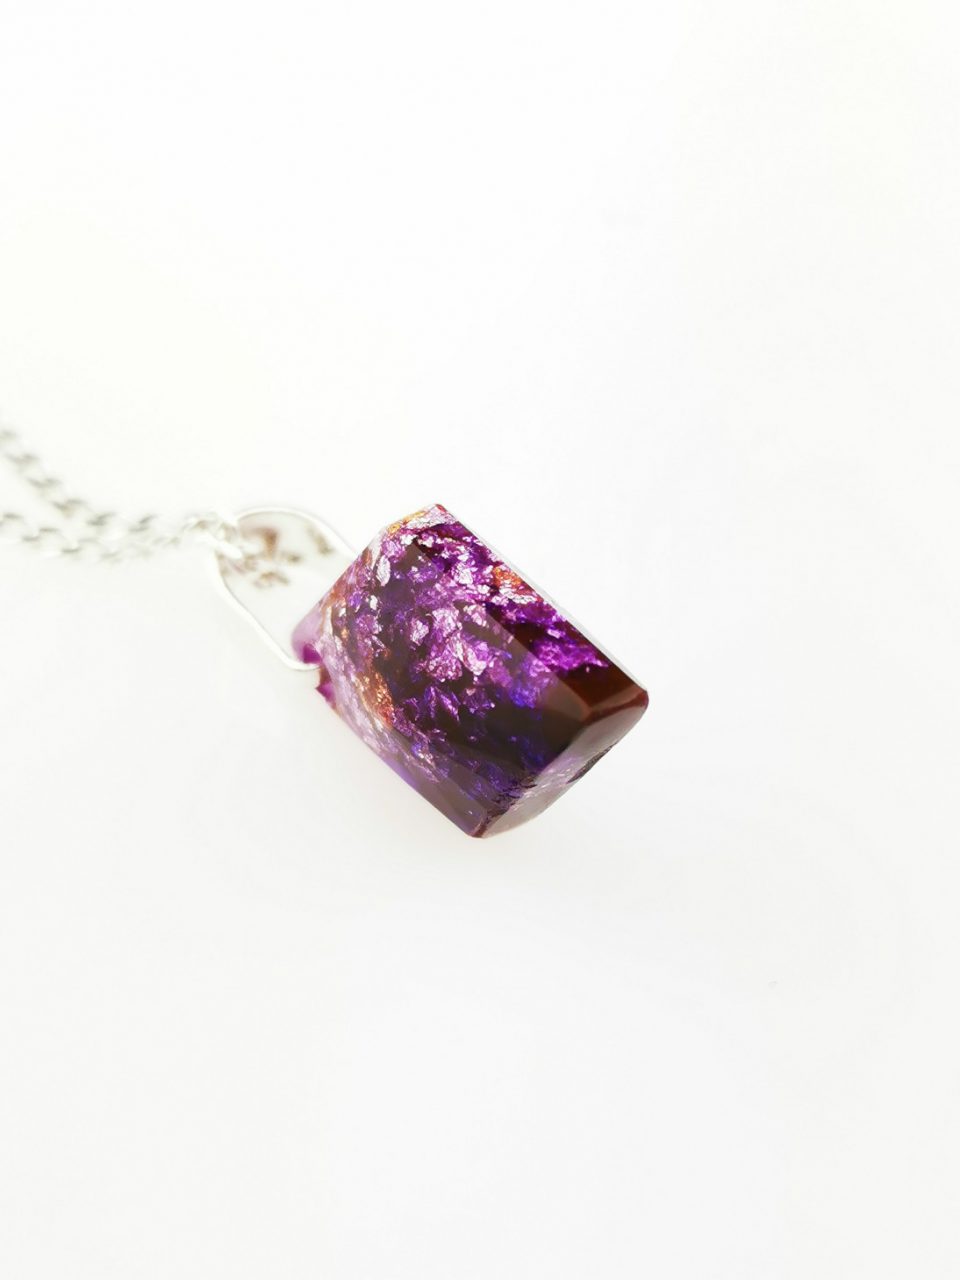 Violet Rhombus Orgone Pendant with Gold and Silver by OrgoneVibes